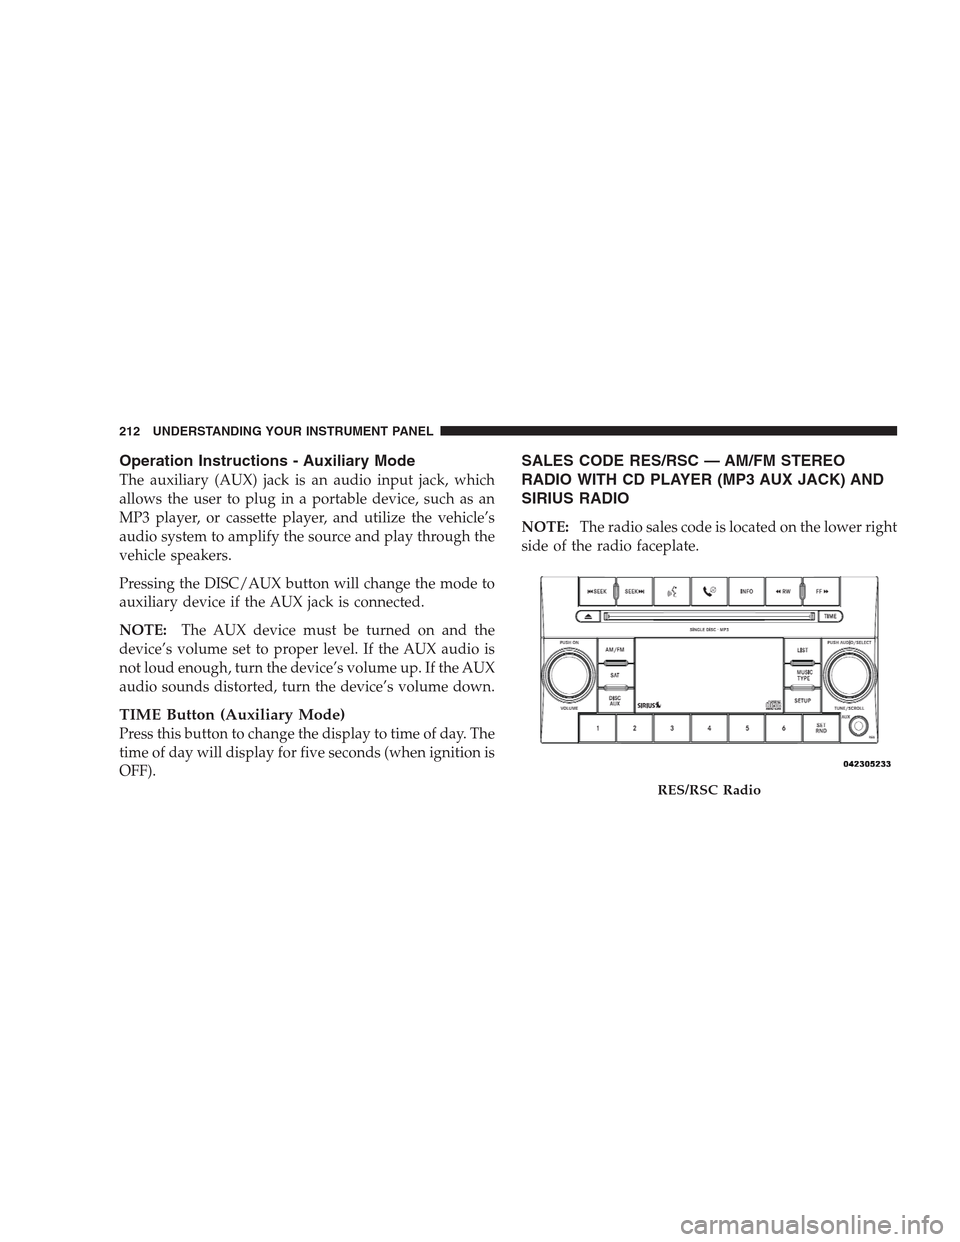 JEEP COMPASS 2009 1.G Owners Manual Operation Instructions - Auxiliary Mode
The auxiliary (AUX) jack is an audio input jack, which
allows the user to plug in a portable device, such as an
MP3 player, or cassette player, and utilize the 